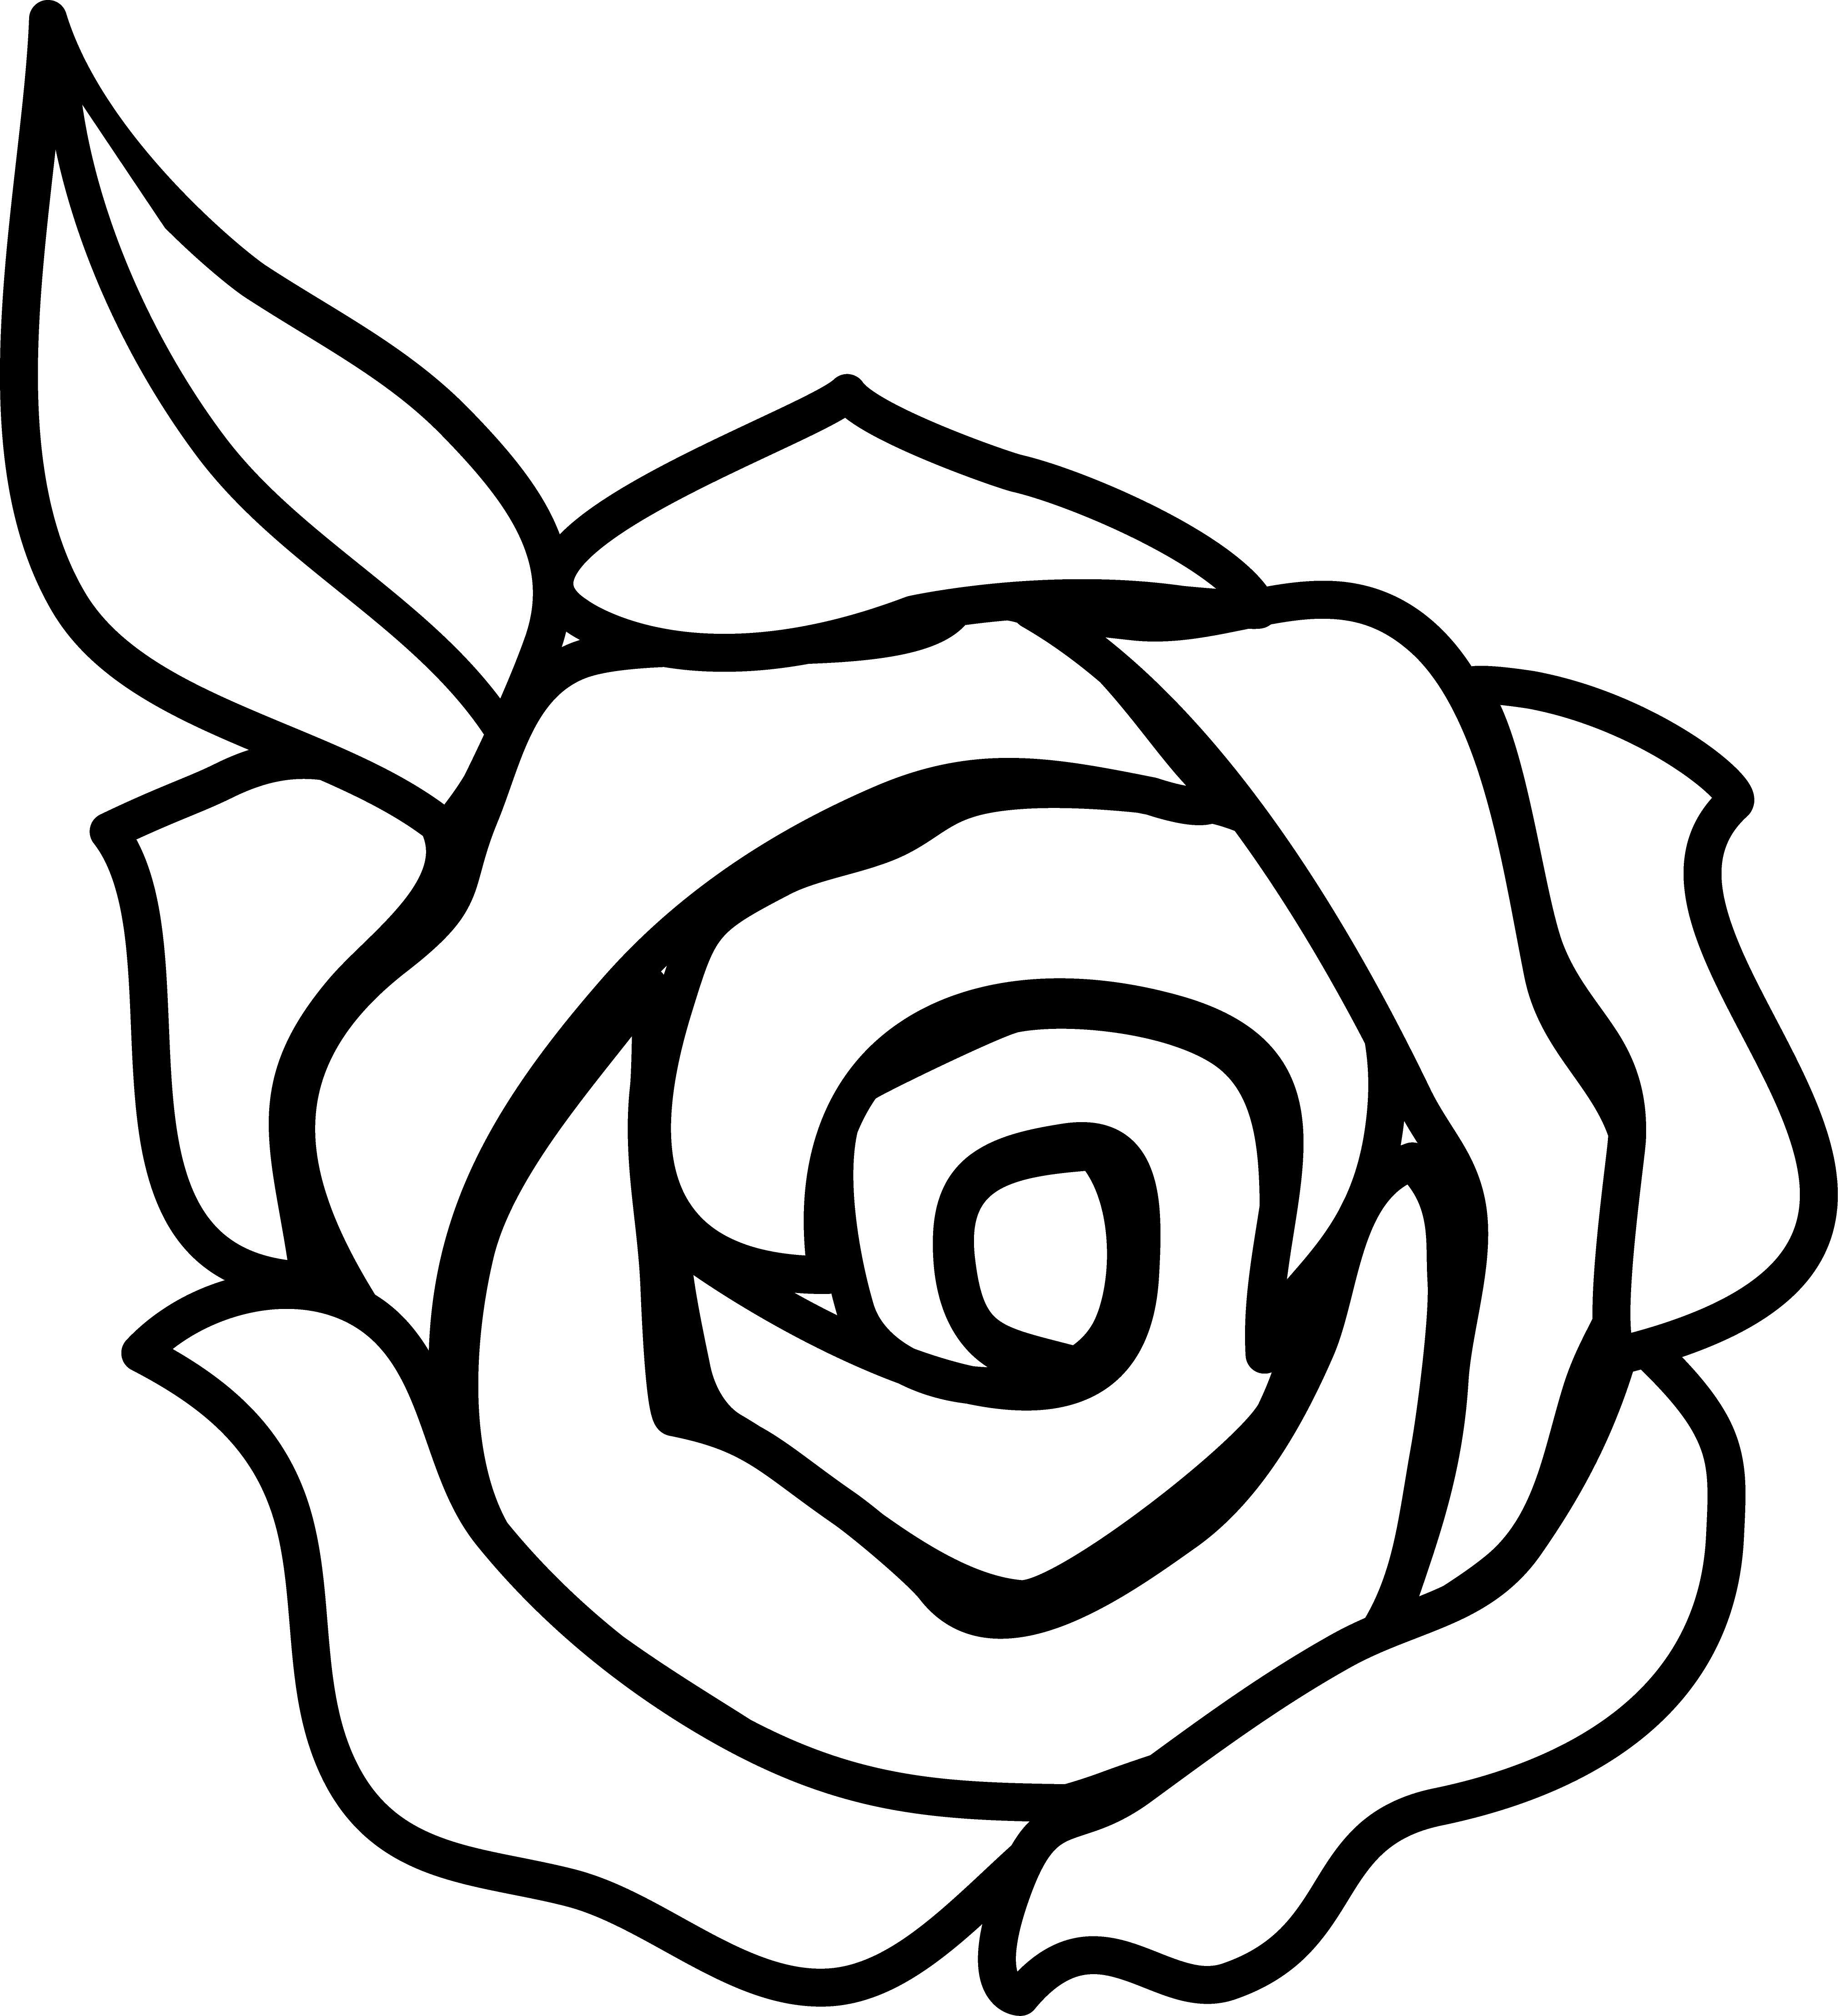 Black And White Drawings Of Roses - ClipArt Best